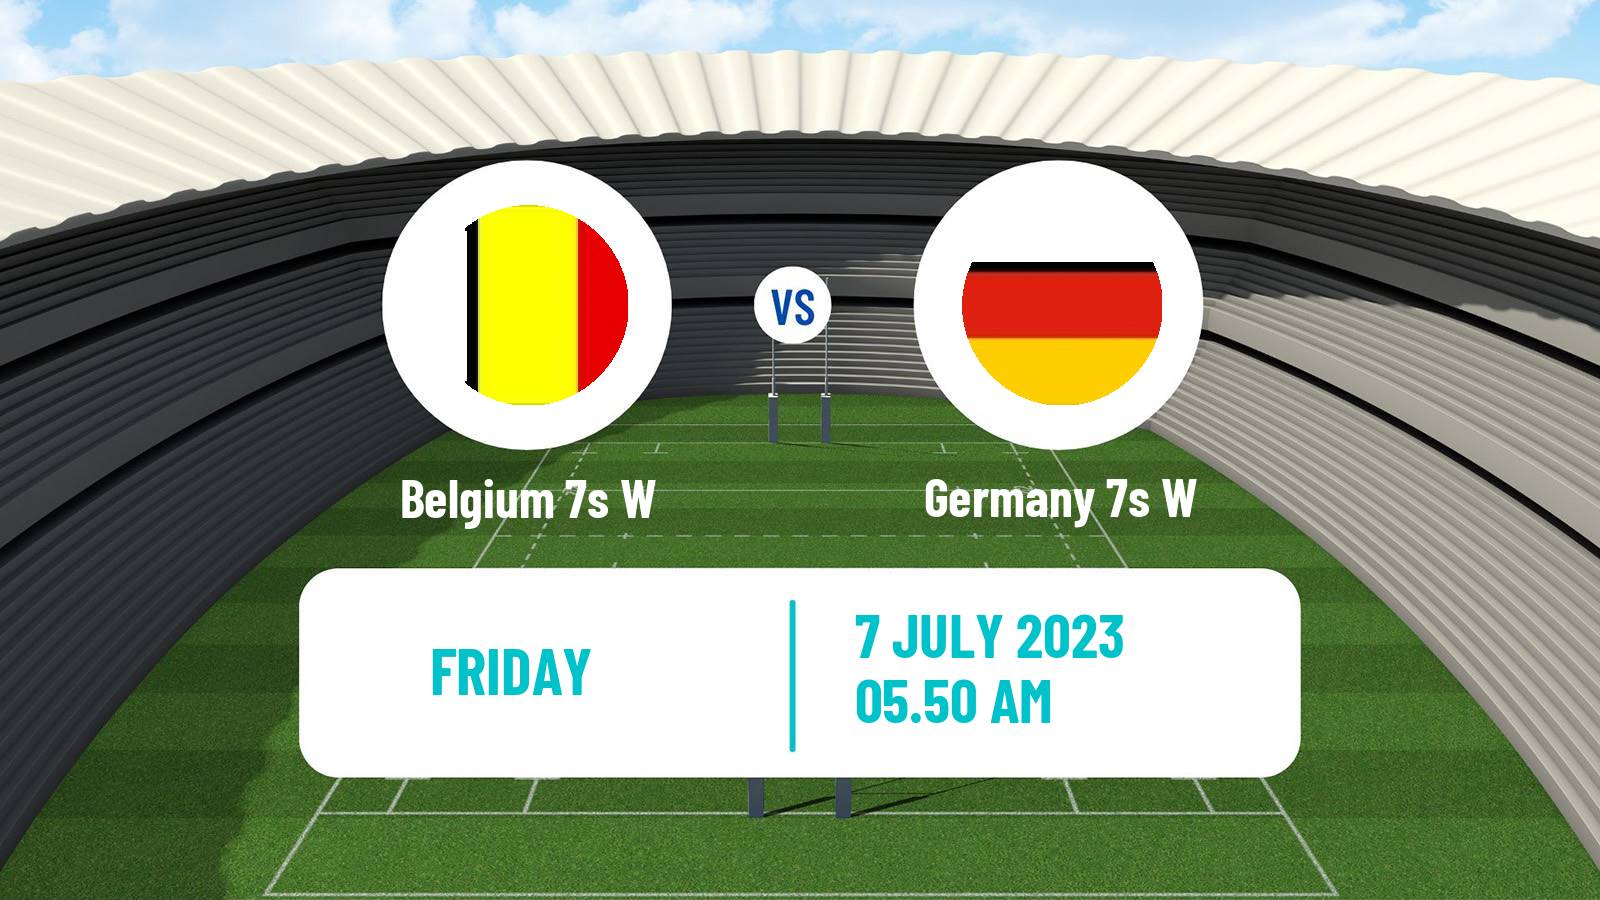 Rugby union Sevens Europe Series Women - Germany Belgium 7s W - Germany 7s W